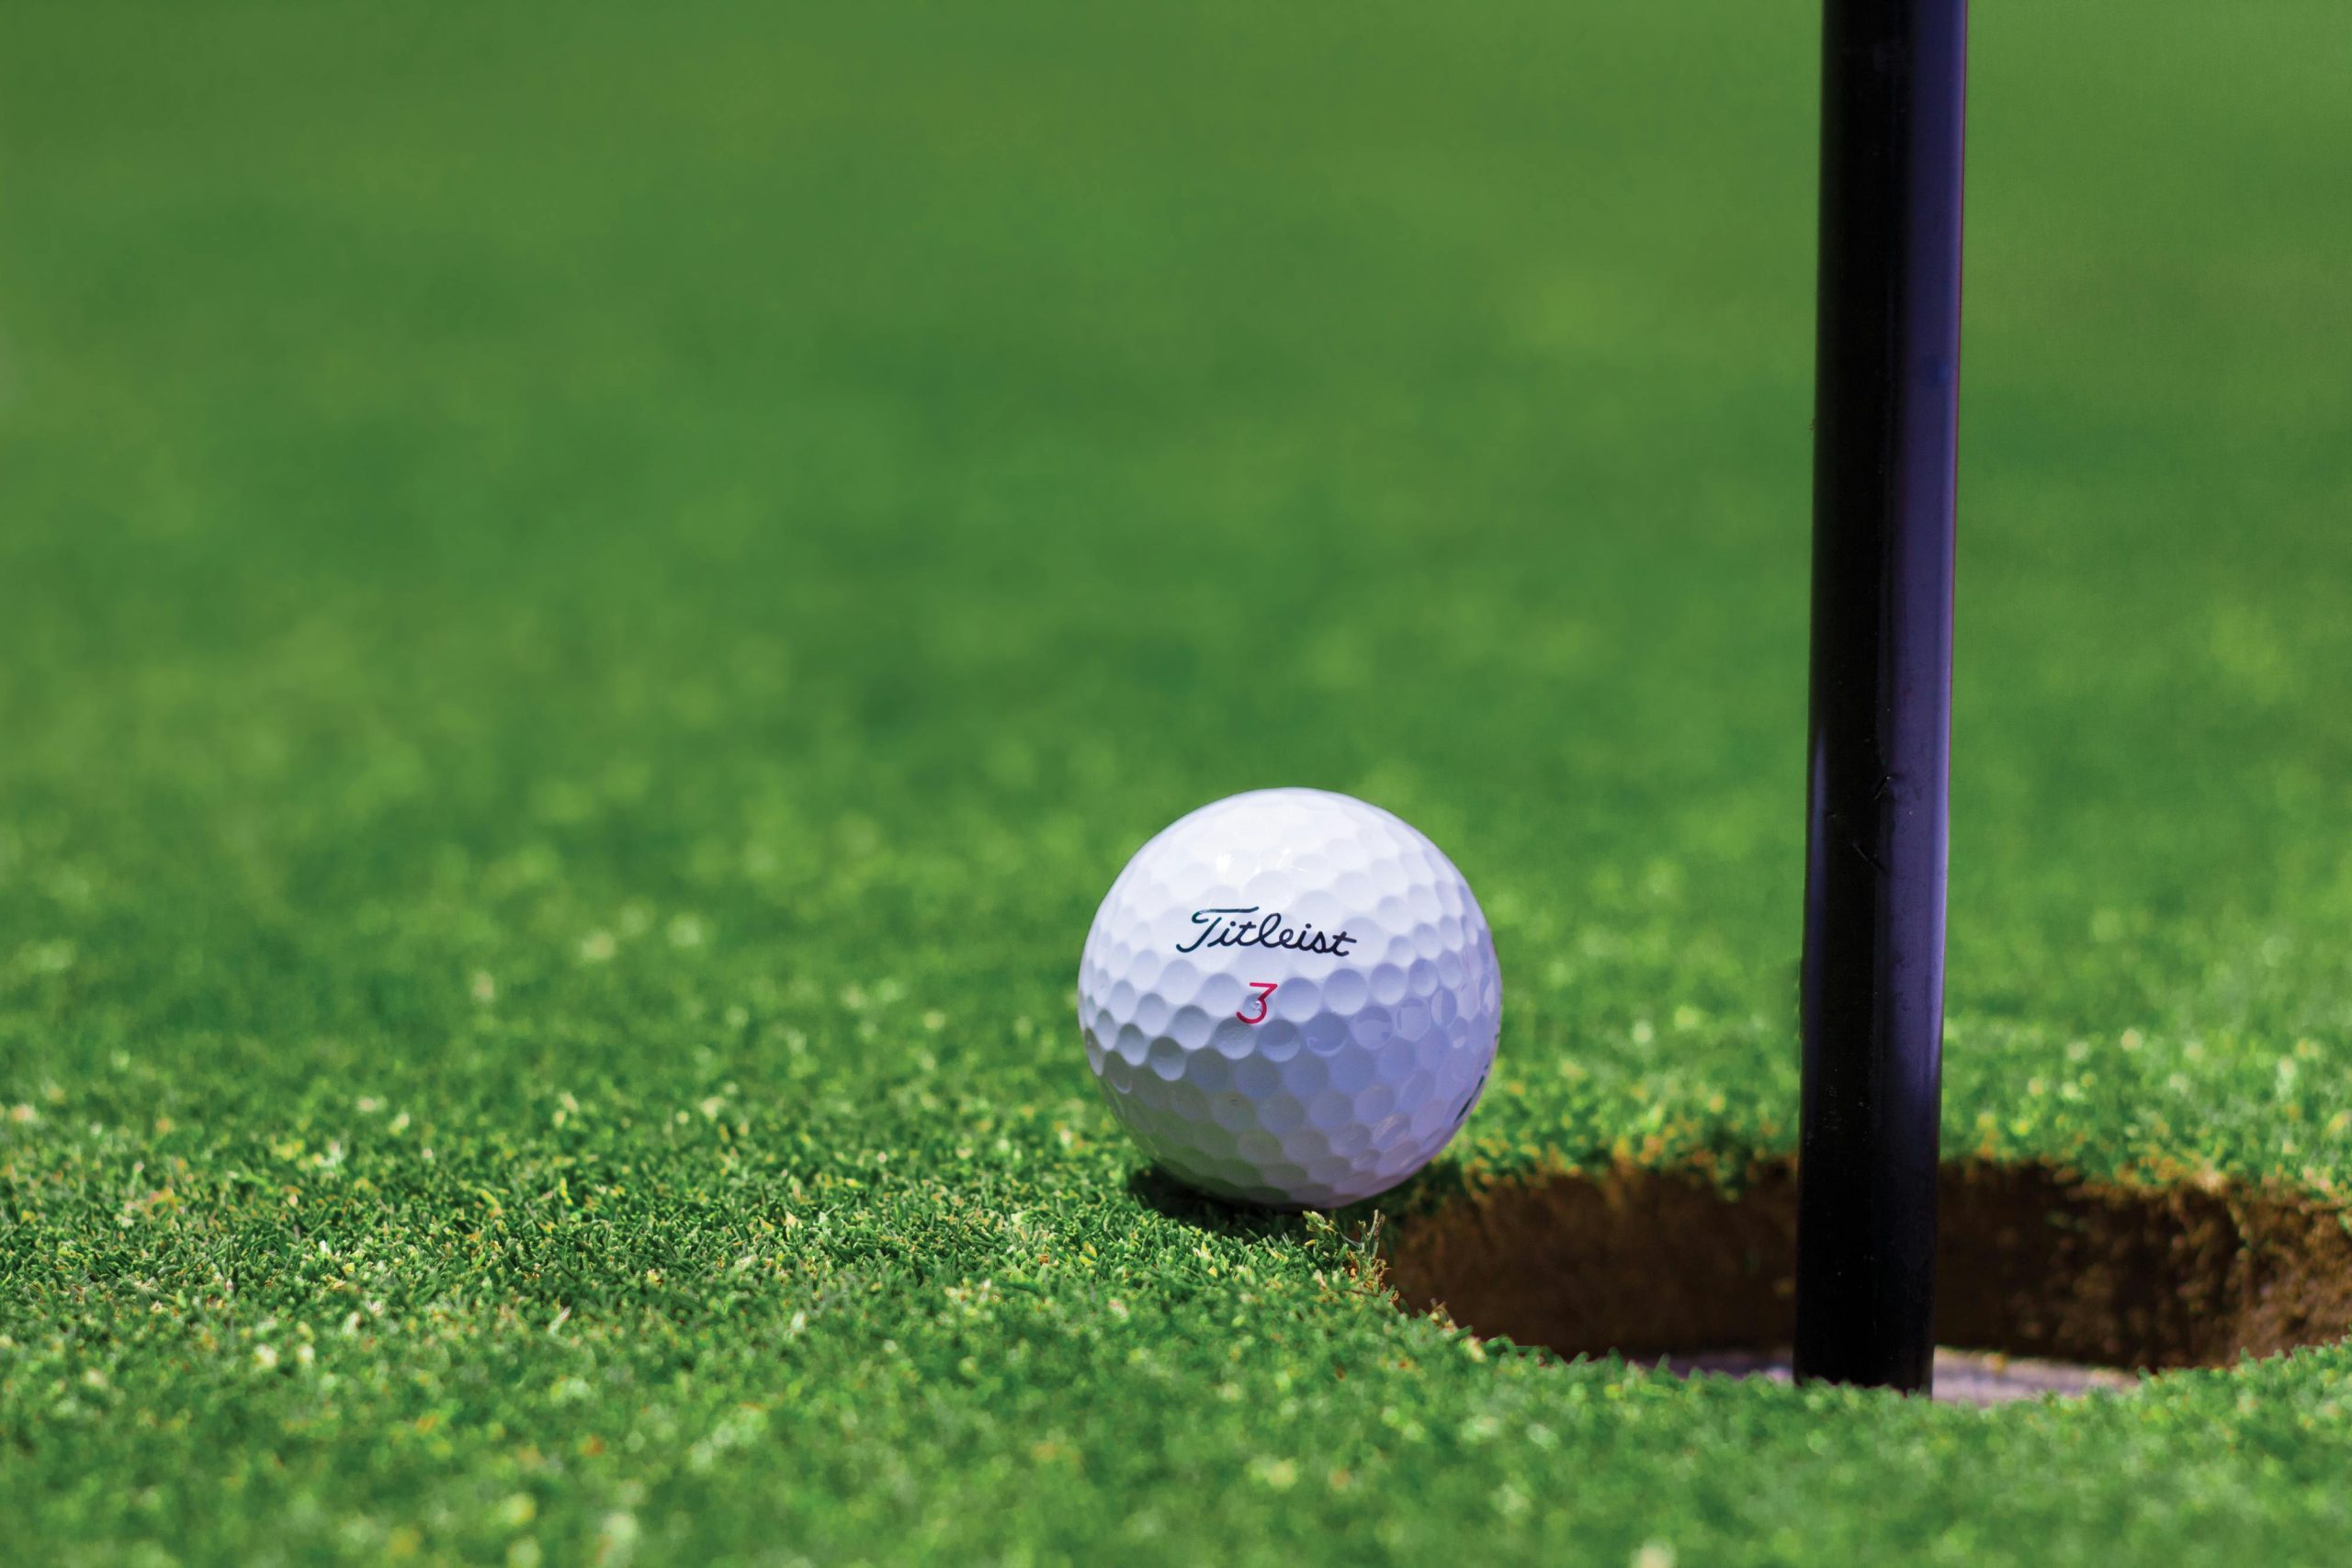 A close-up shot of a Titleist golf ball positioned near the edge of a hole on a lush green putting surface.